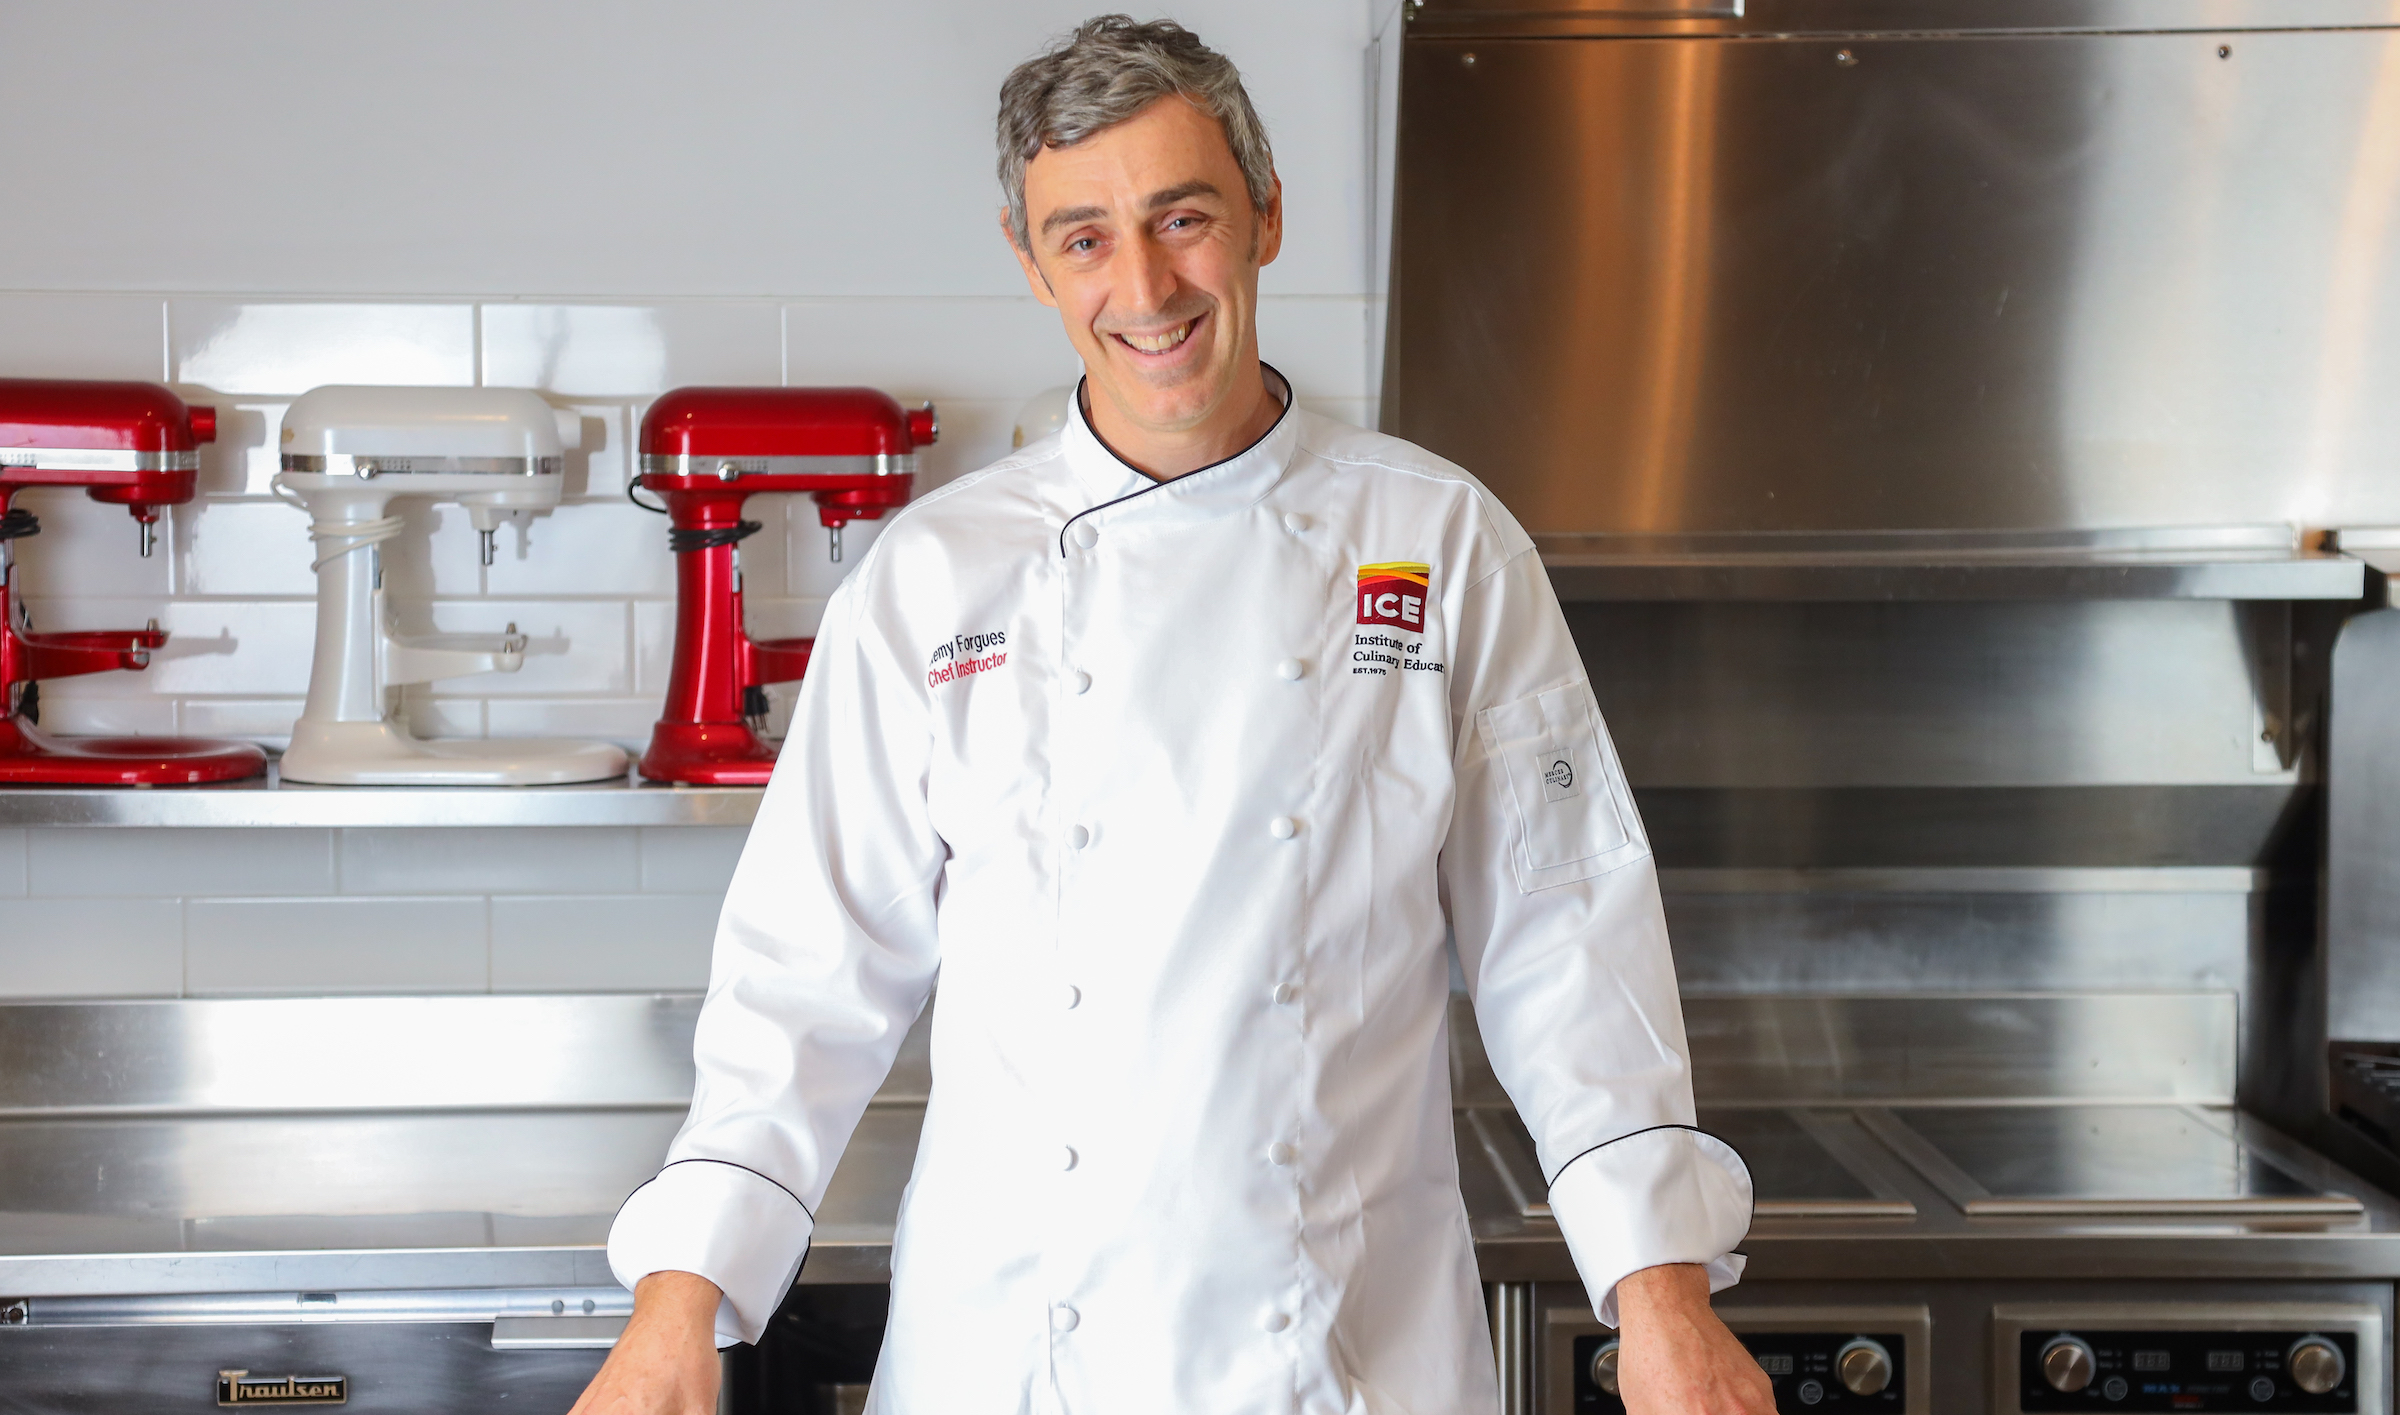 Chef-Instructor Remy Forgues stands in a kitchen smiling